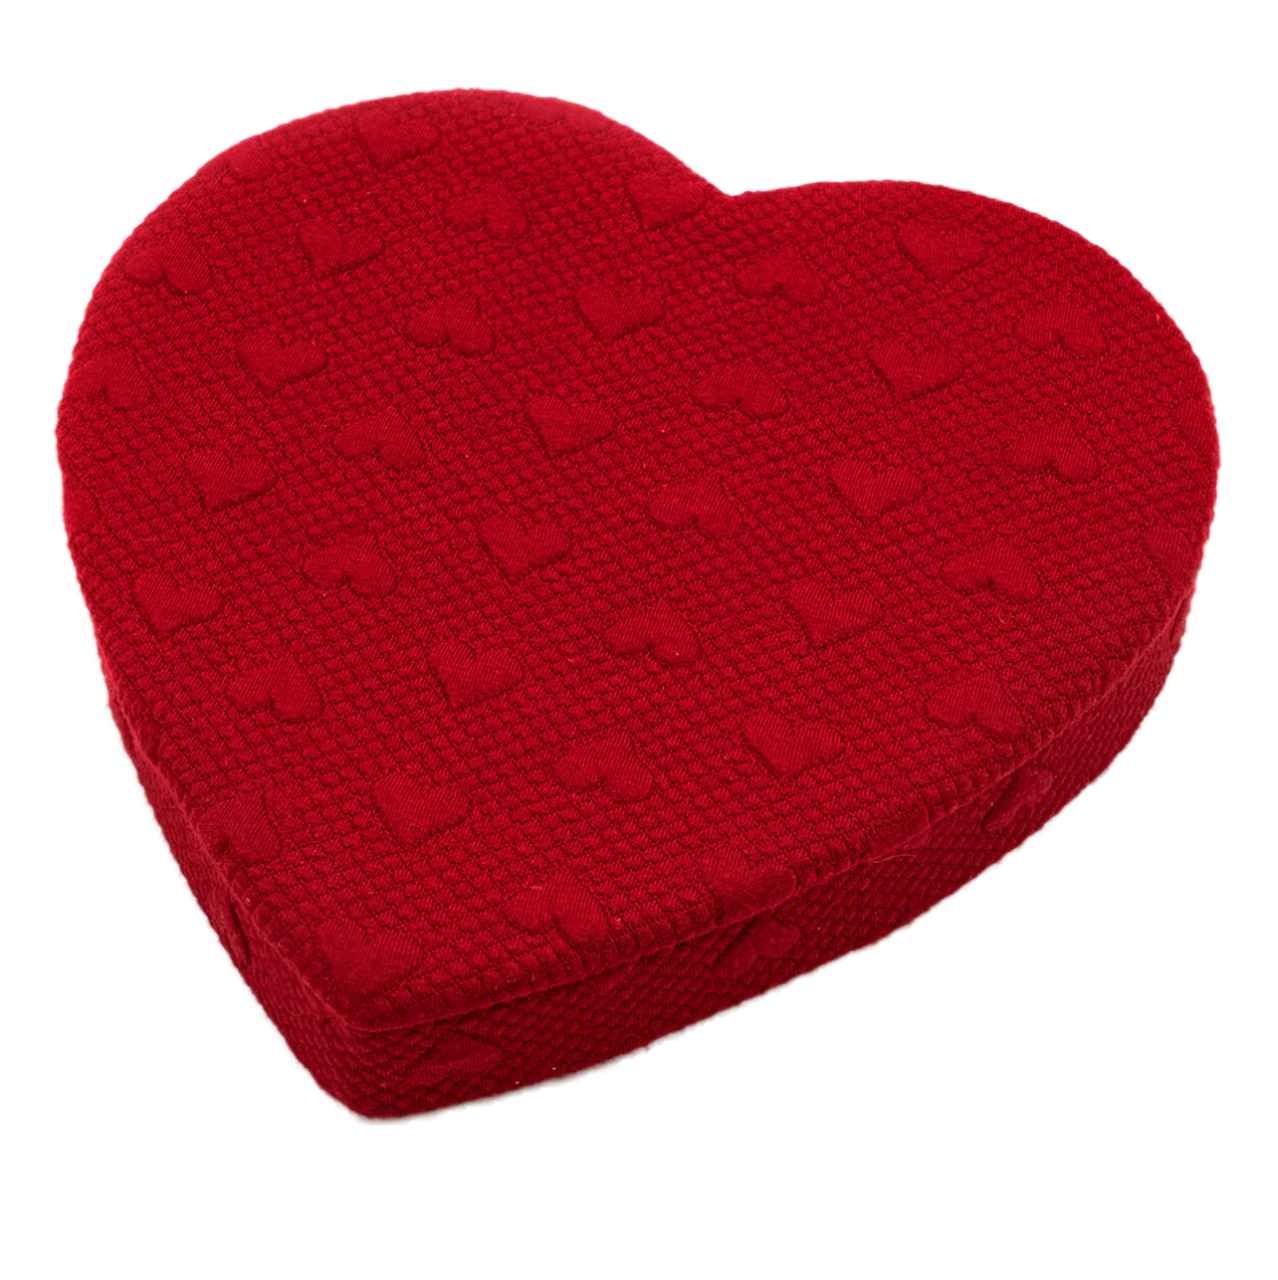 1 lb. Assorted Chocolates in a Red Velvet Heart Box (Style #114)